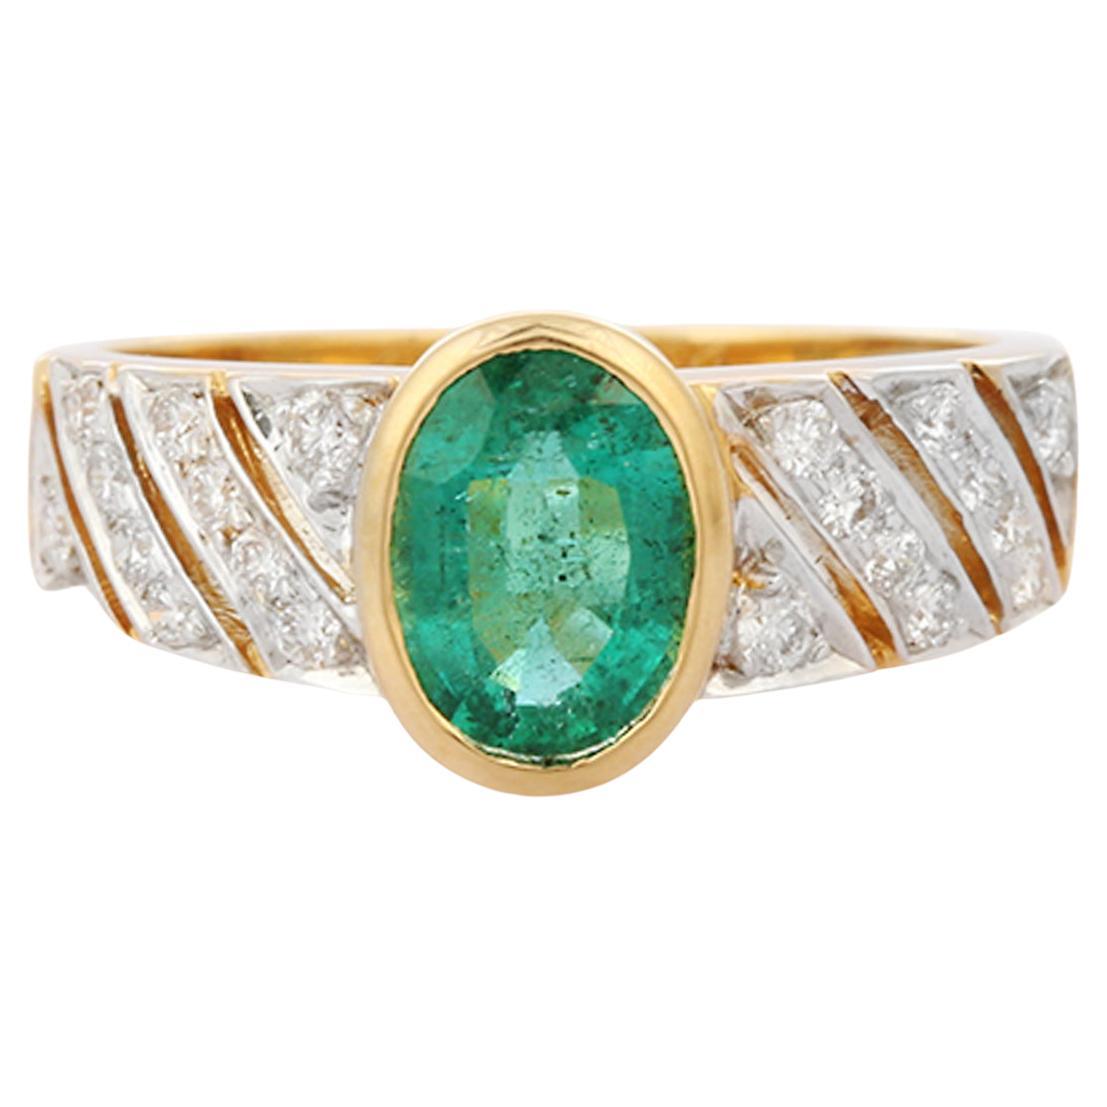 Exquisite Emerald and Diamond Engagement Ring for Men in 18k Yellow Gold